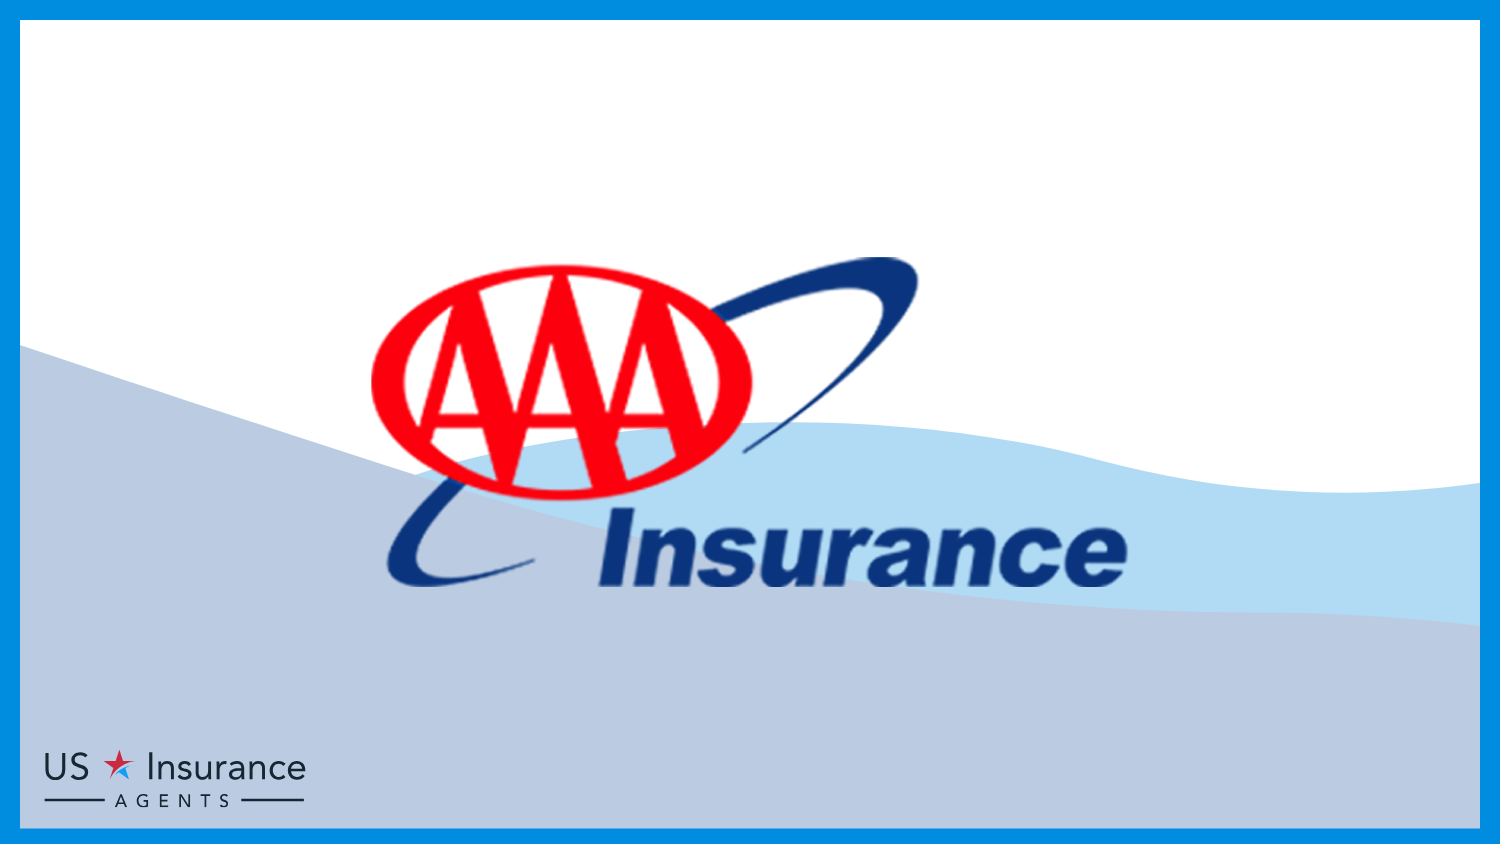 AAA: Best Car Insurance for Domestic Partnerships 